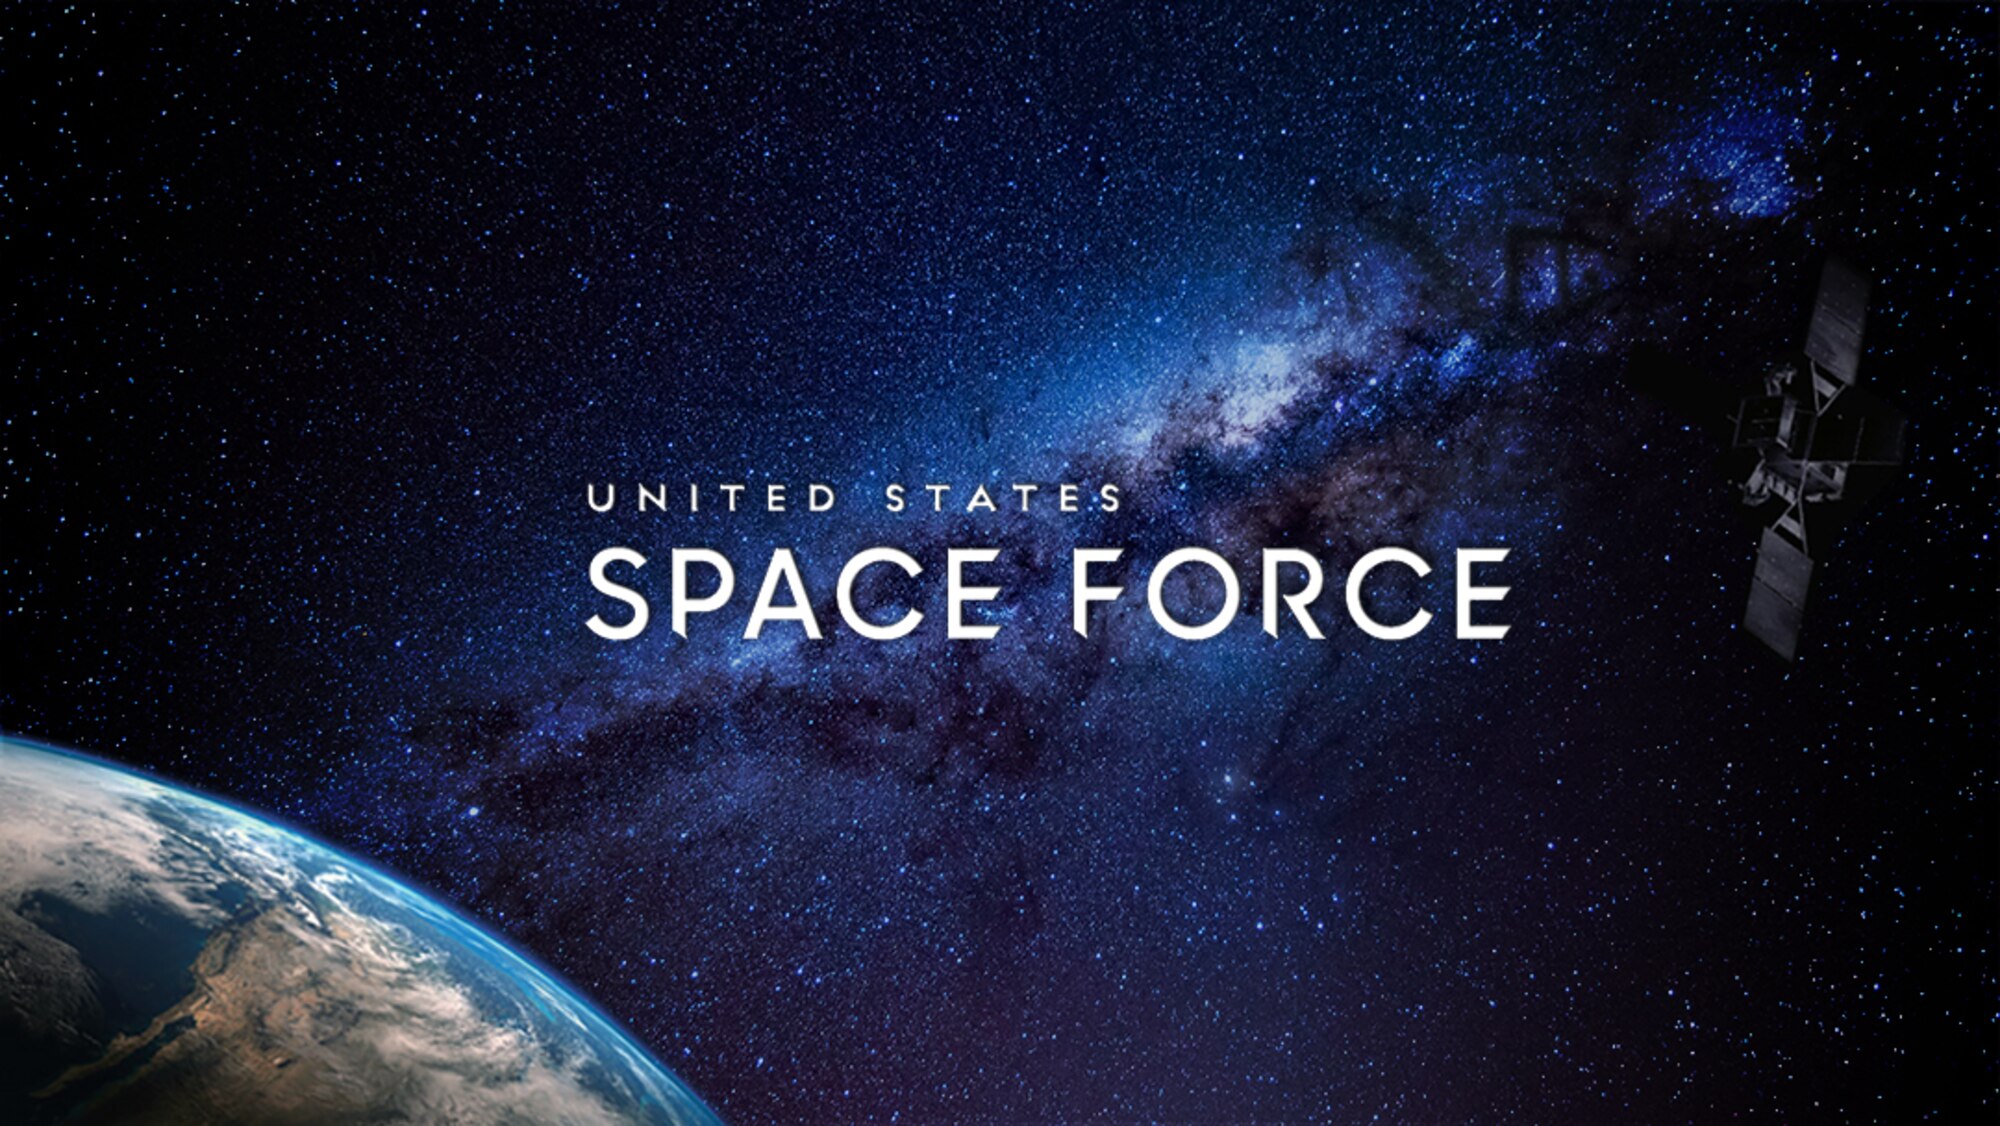 U.S. Space Force organizes, trains, and equips space forces in order to protect and defend U.S. and allied interests in space and to provide space capabilities to the joint force.